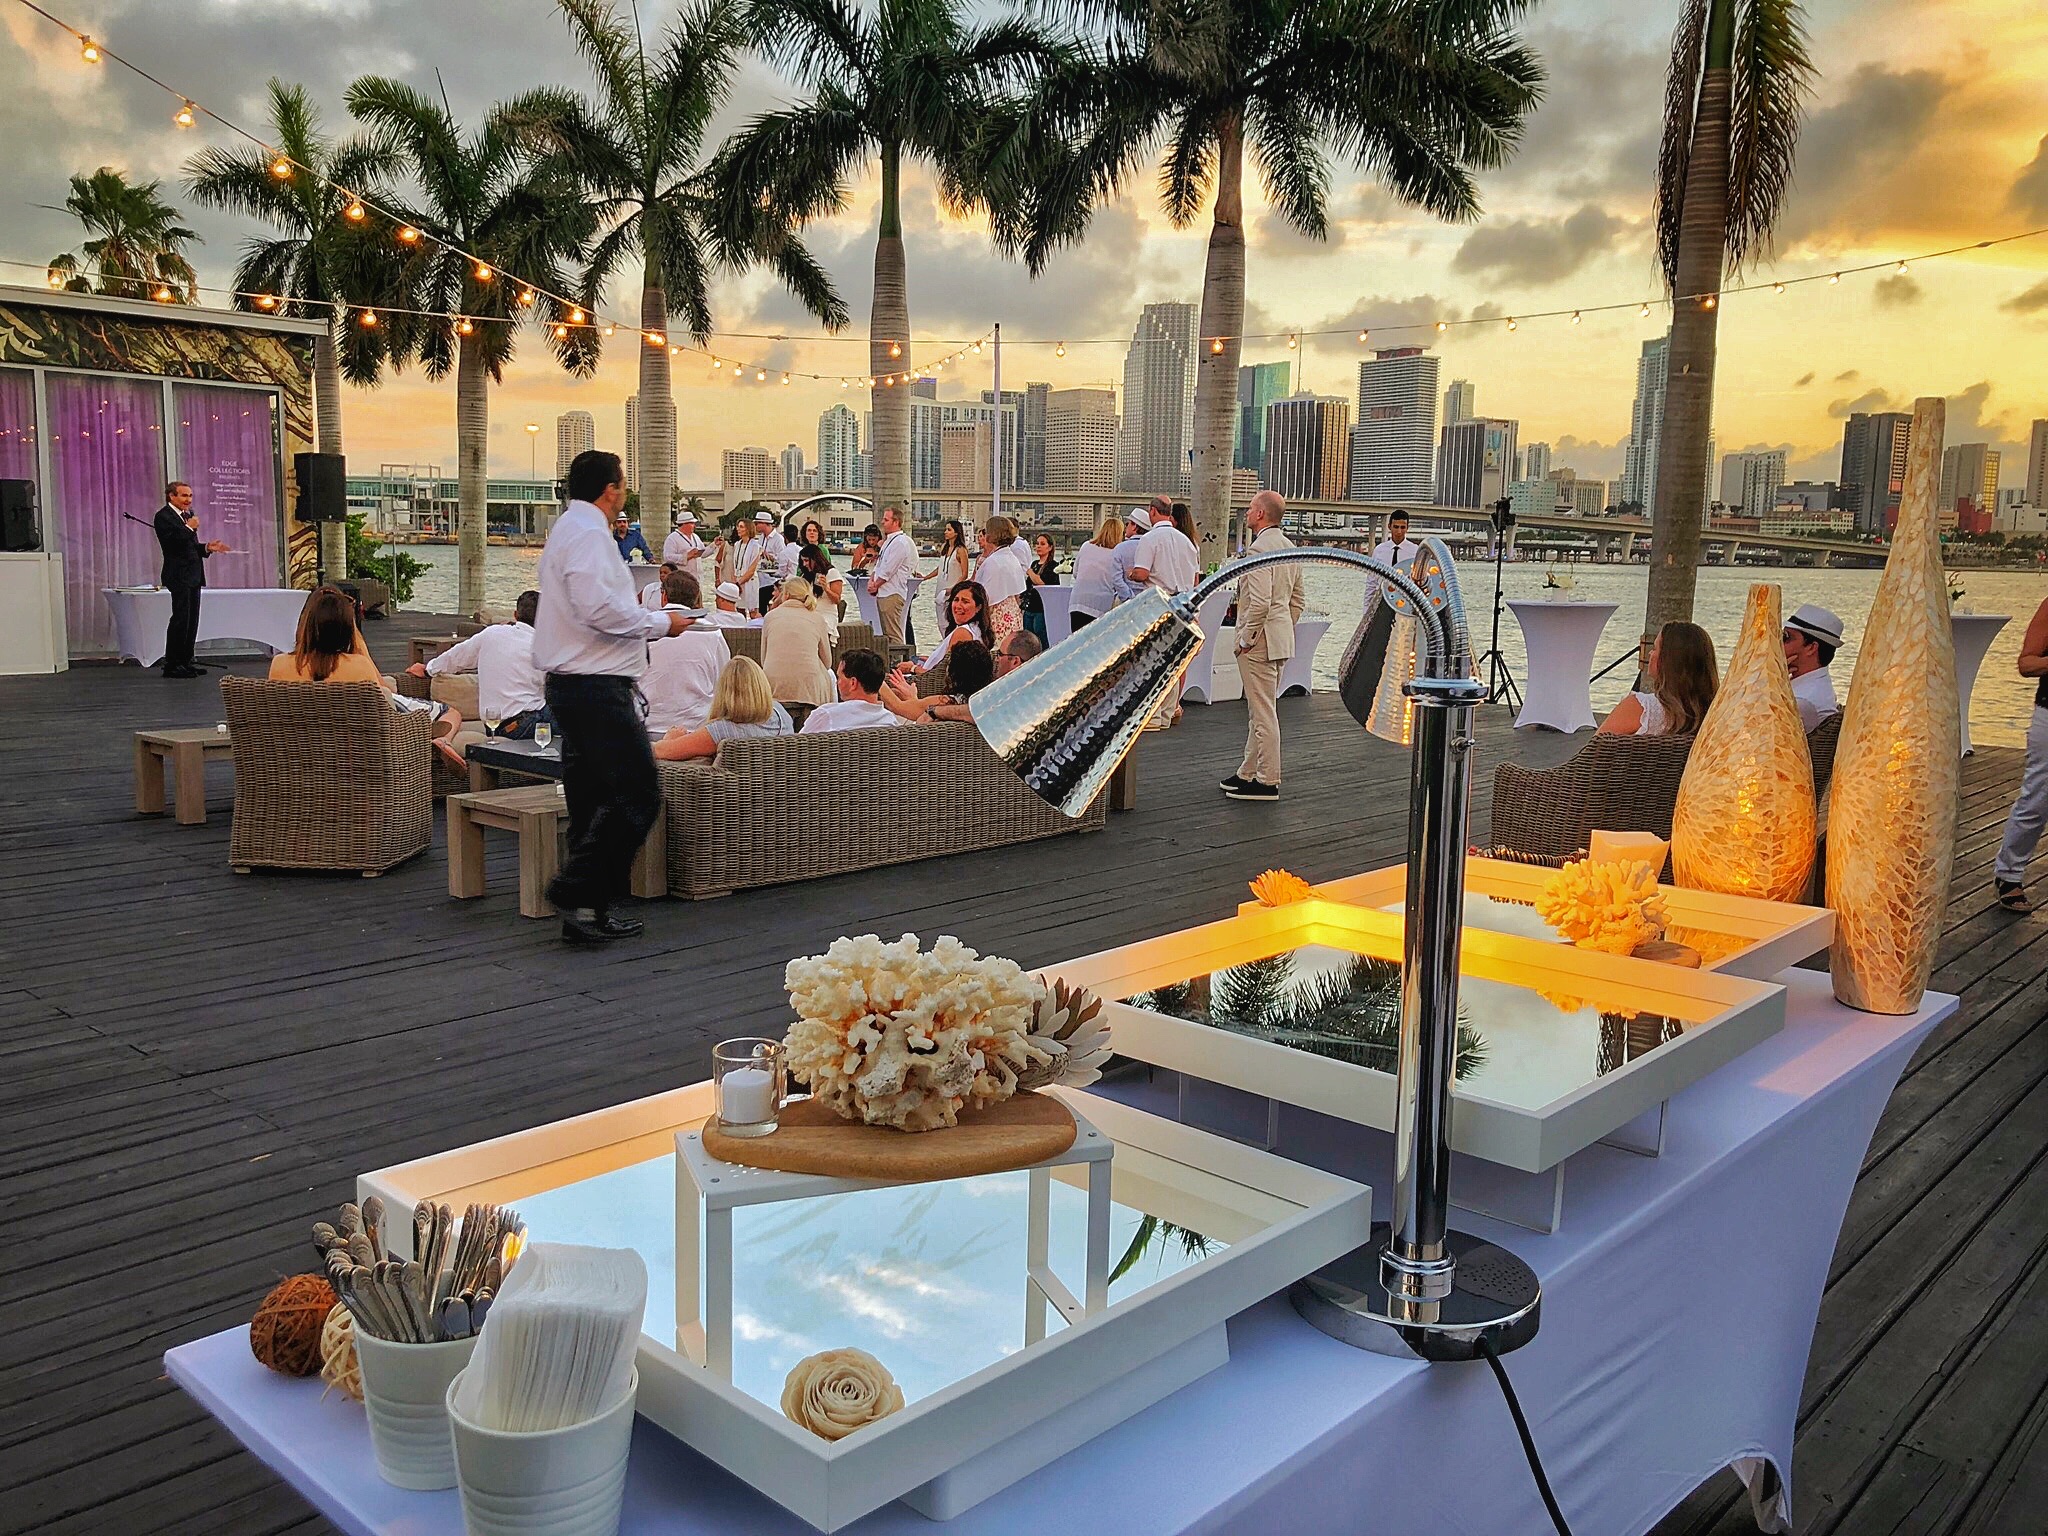  Outdoor Buffet Station at The Deck at Island Garden Marina in Miami Beach 